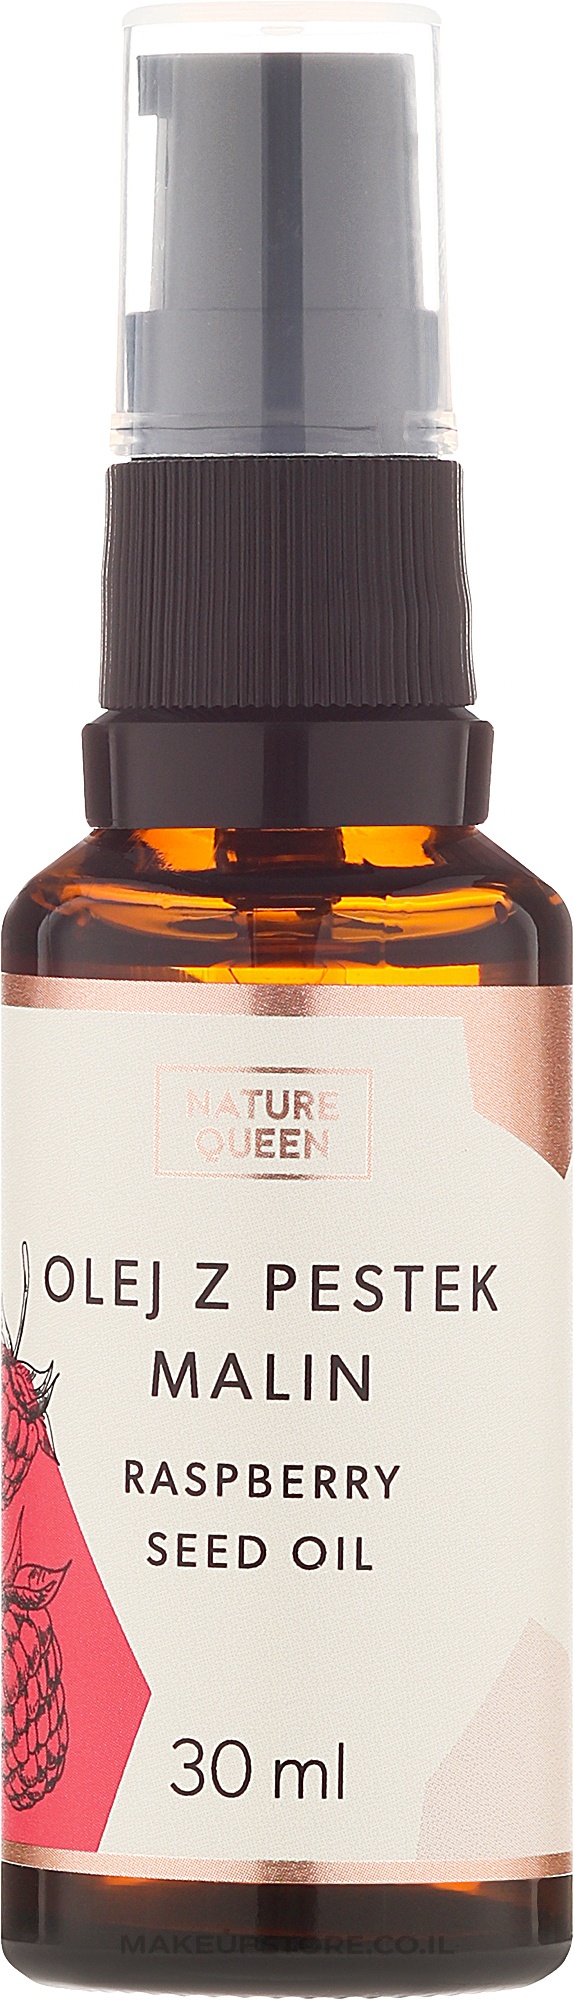 Nature Queen Raspberry Seed Oil